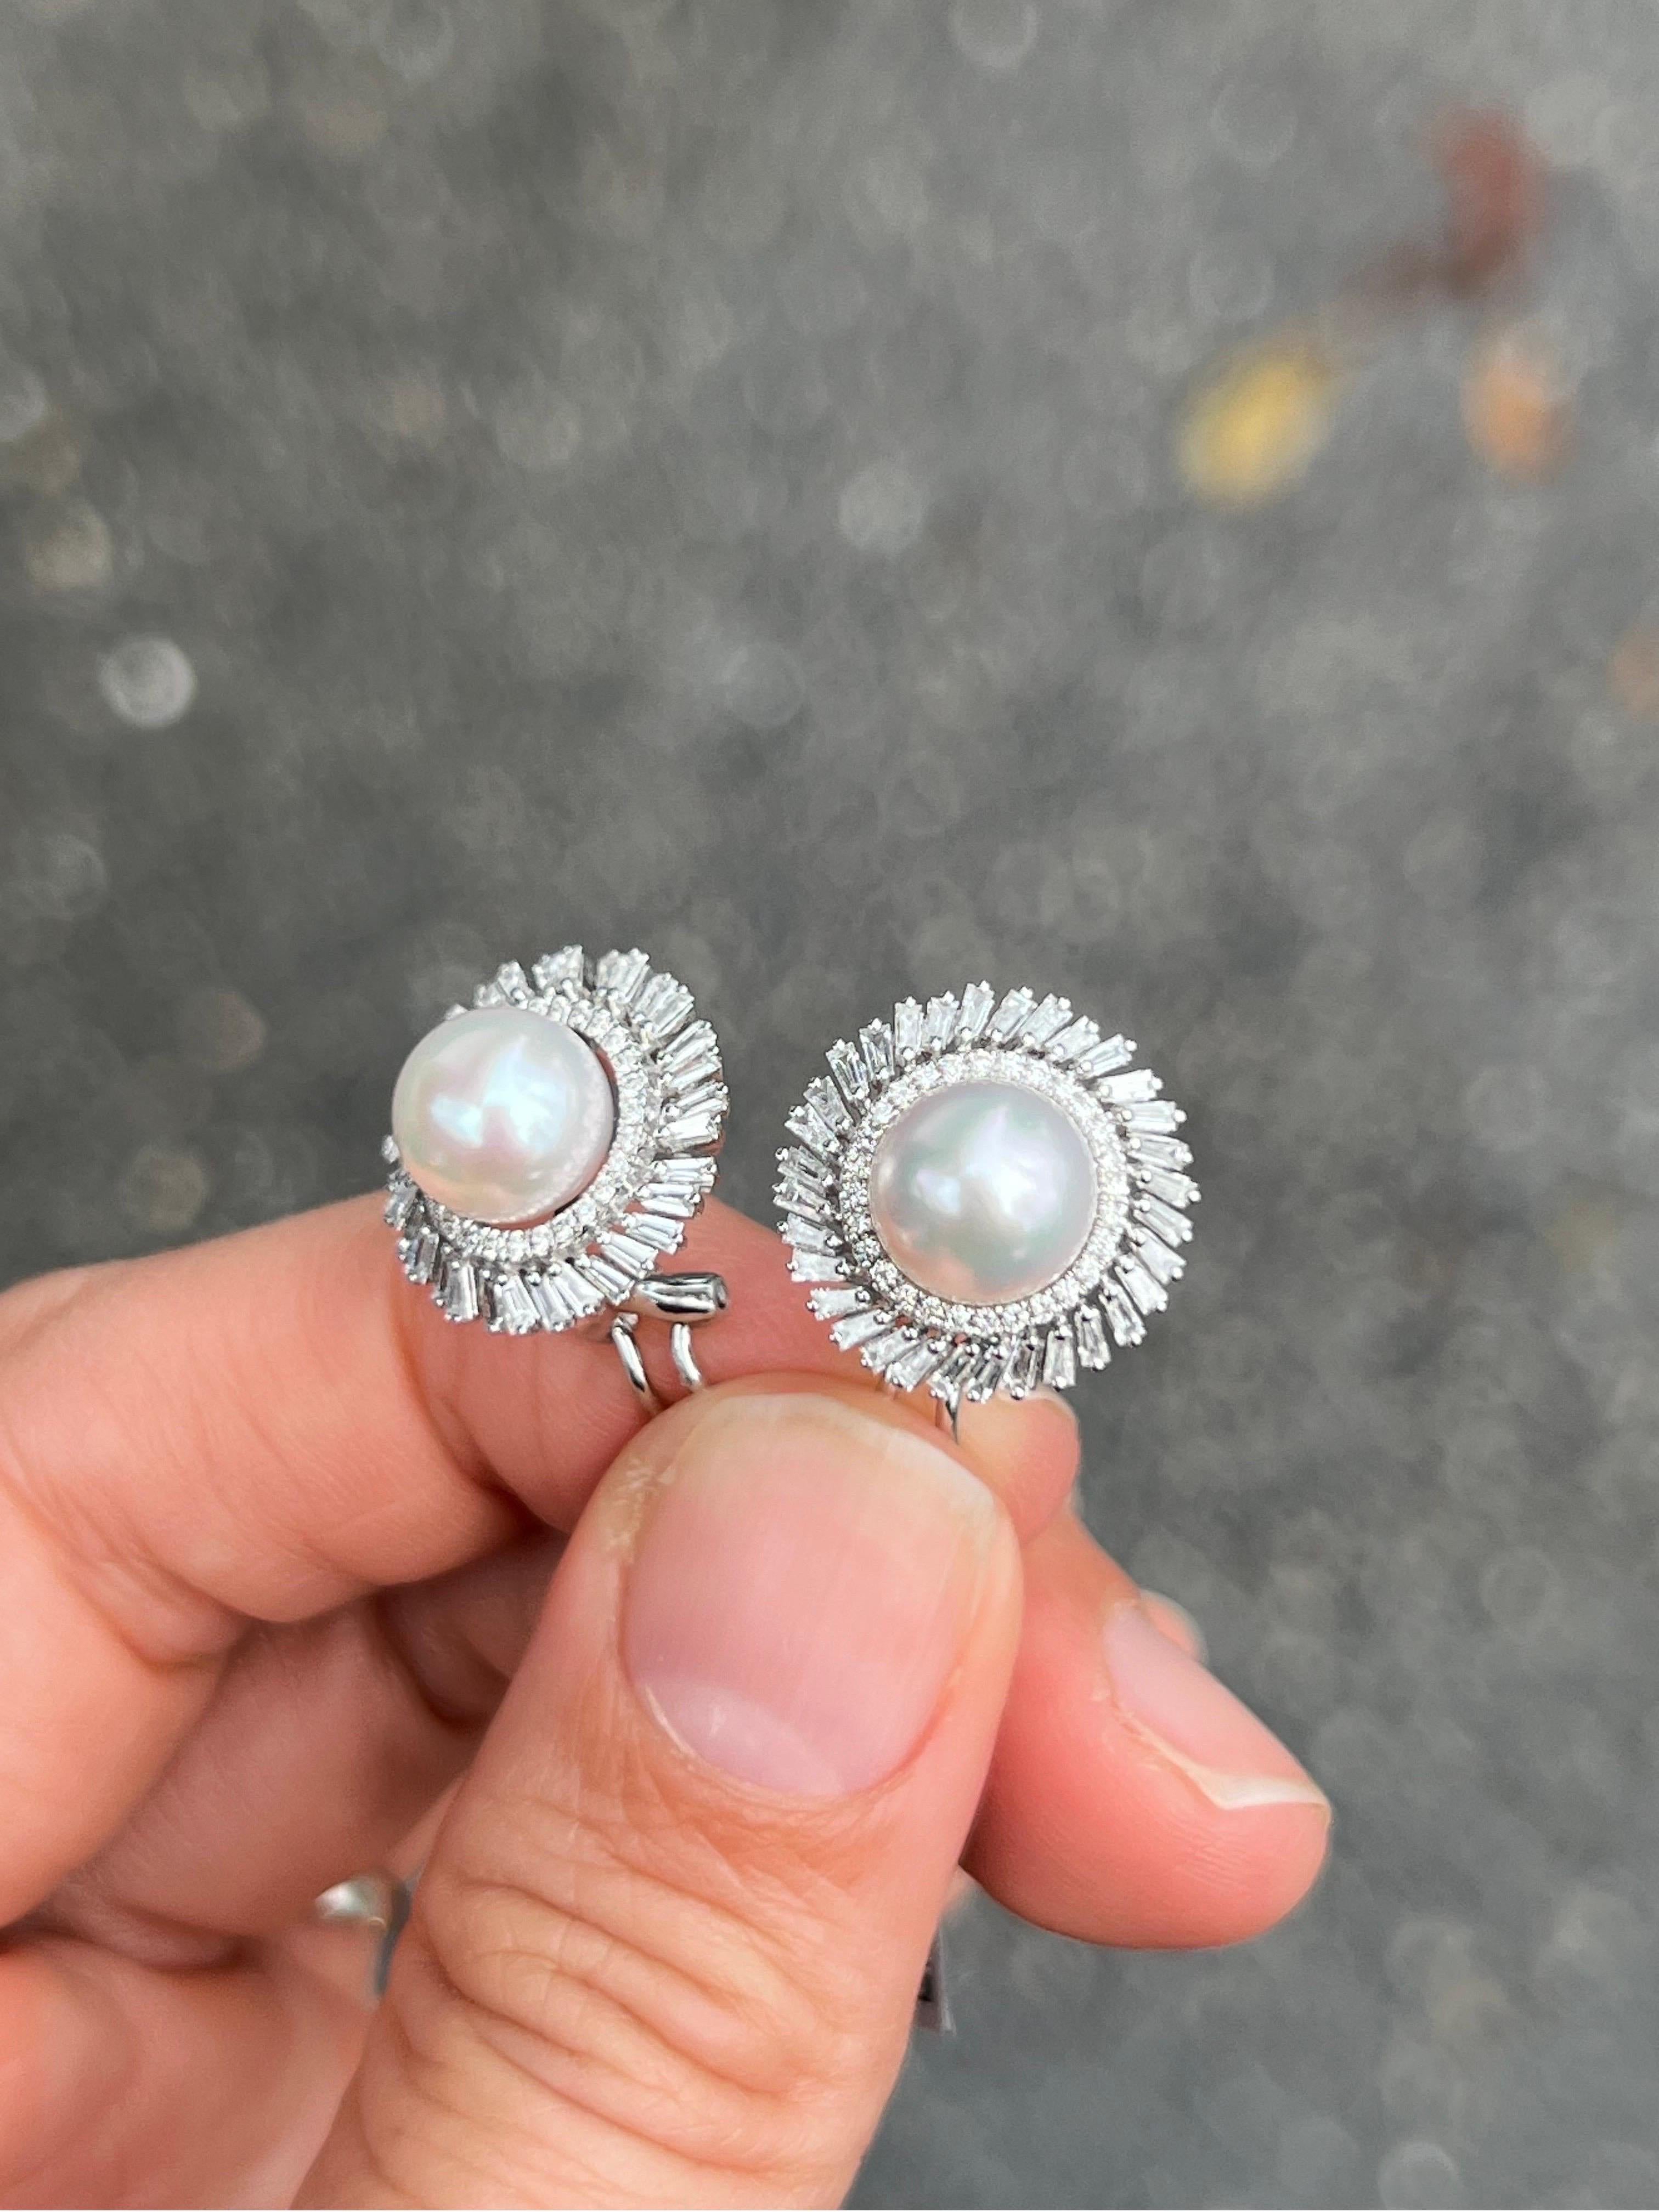 These 18k white gold and baguette diamond earring is a stunning piece that is sure to make a statement. The earrings feature 2 lustrous freshwater pearls.The pearls measure a modest 8mm in size making them a beautiful, not too voluminous size for a